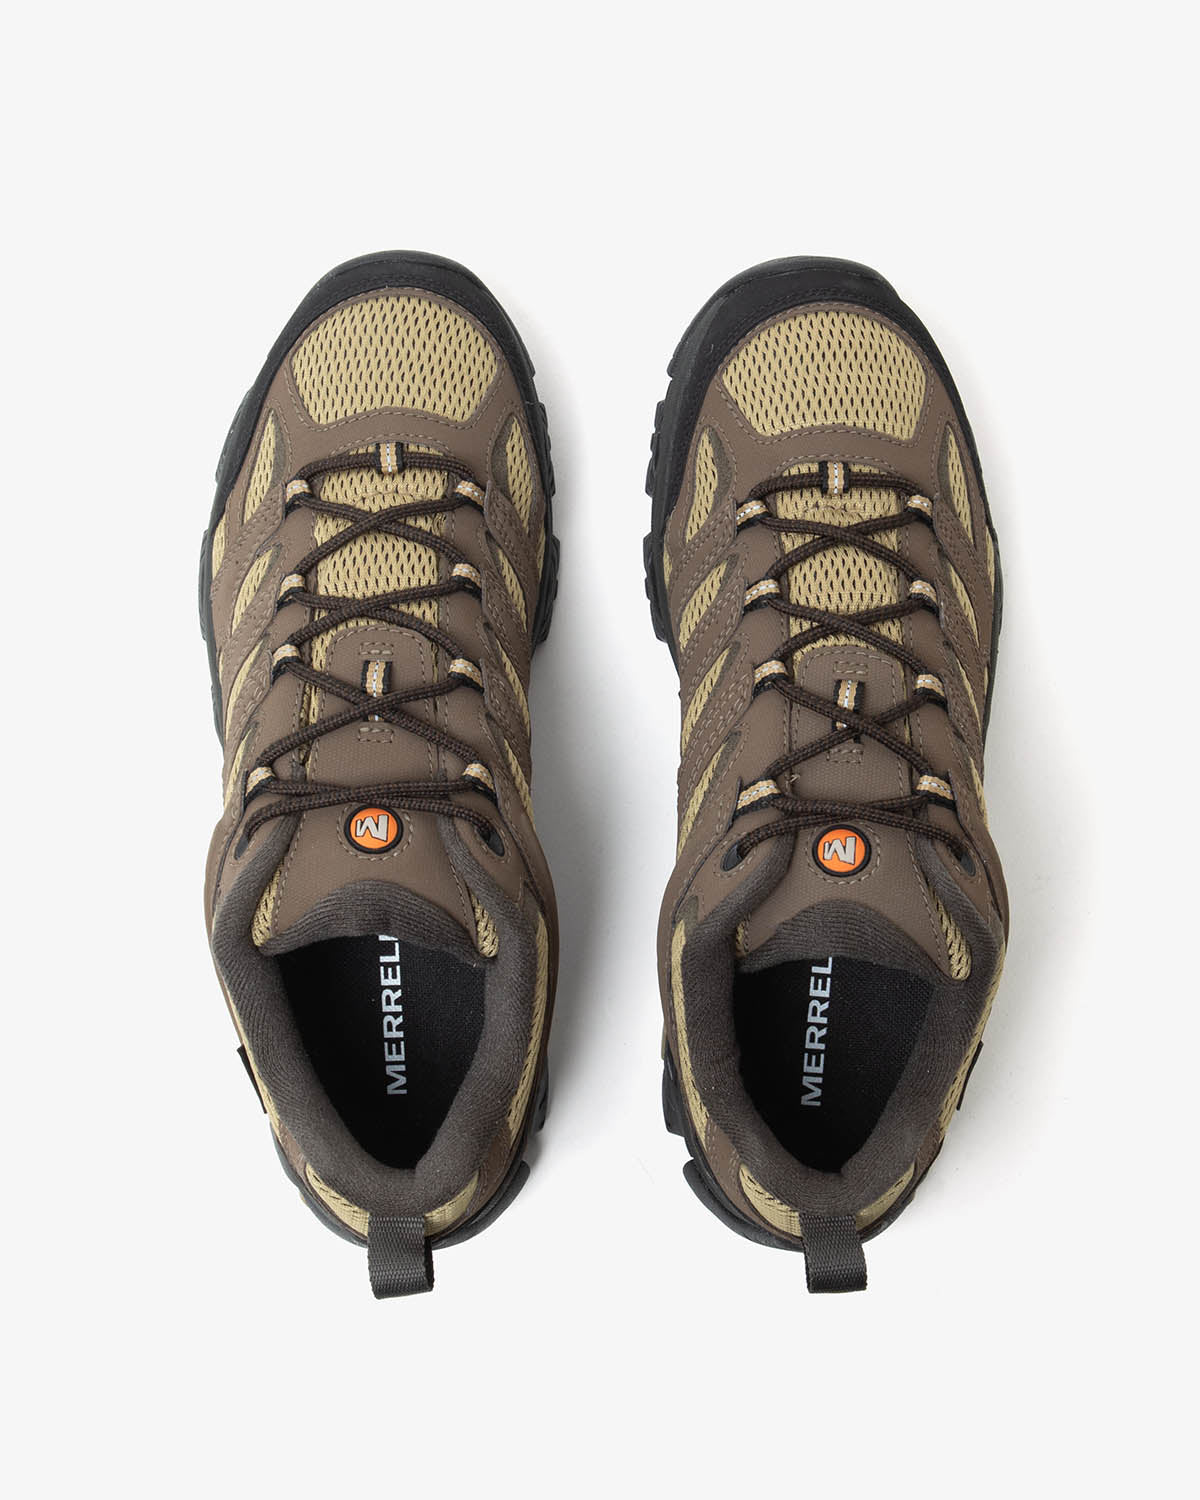 MOAB 3 SYNTHETIC GORE-TEX®